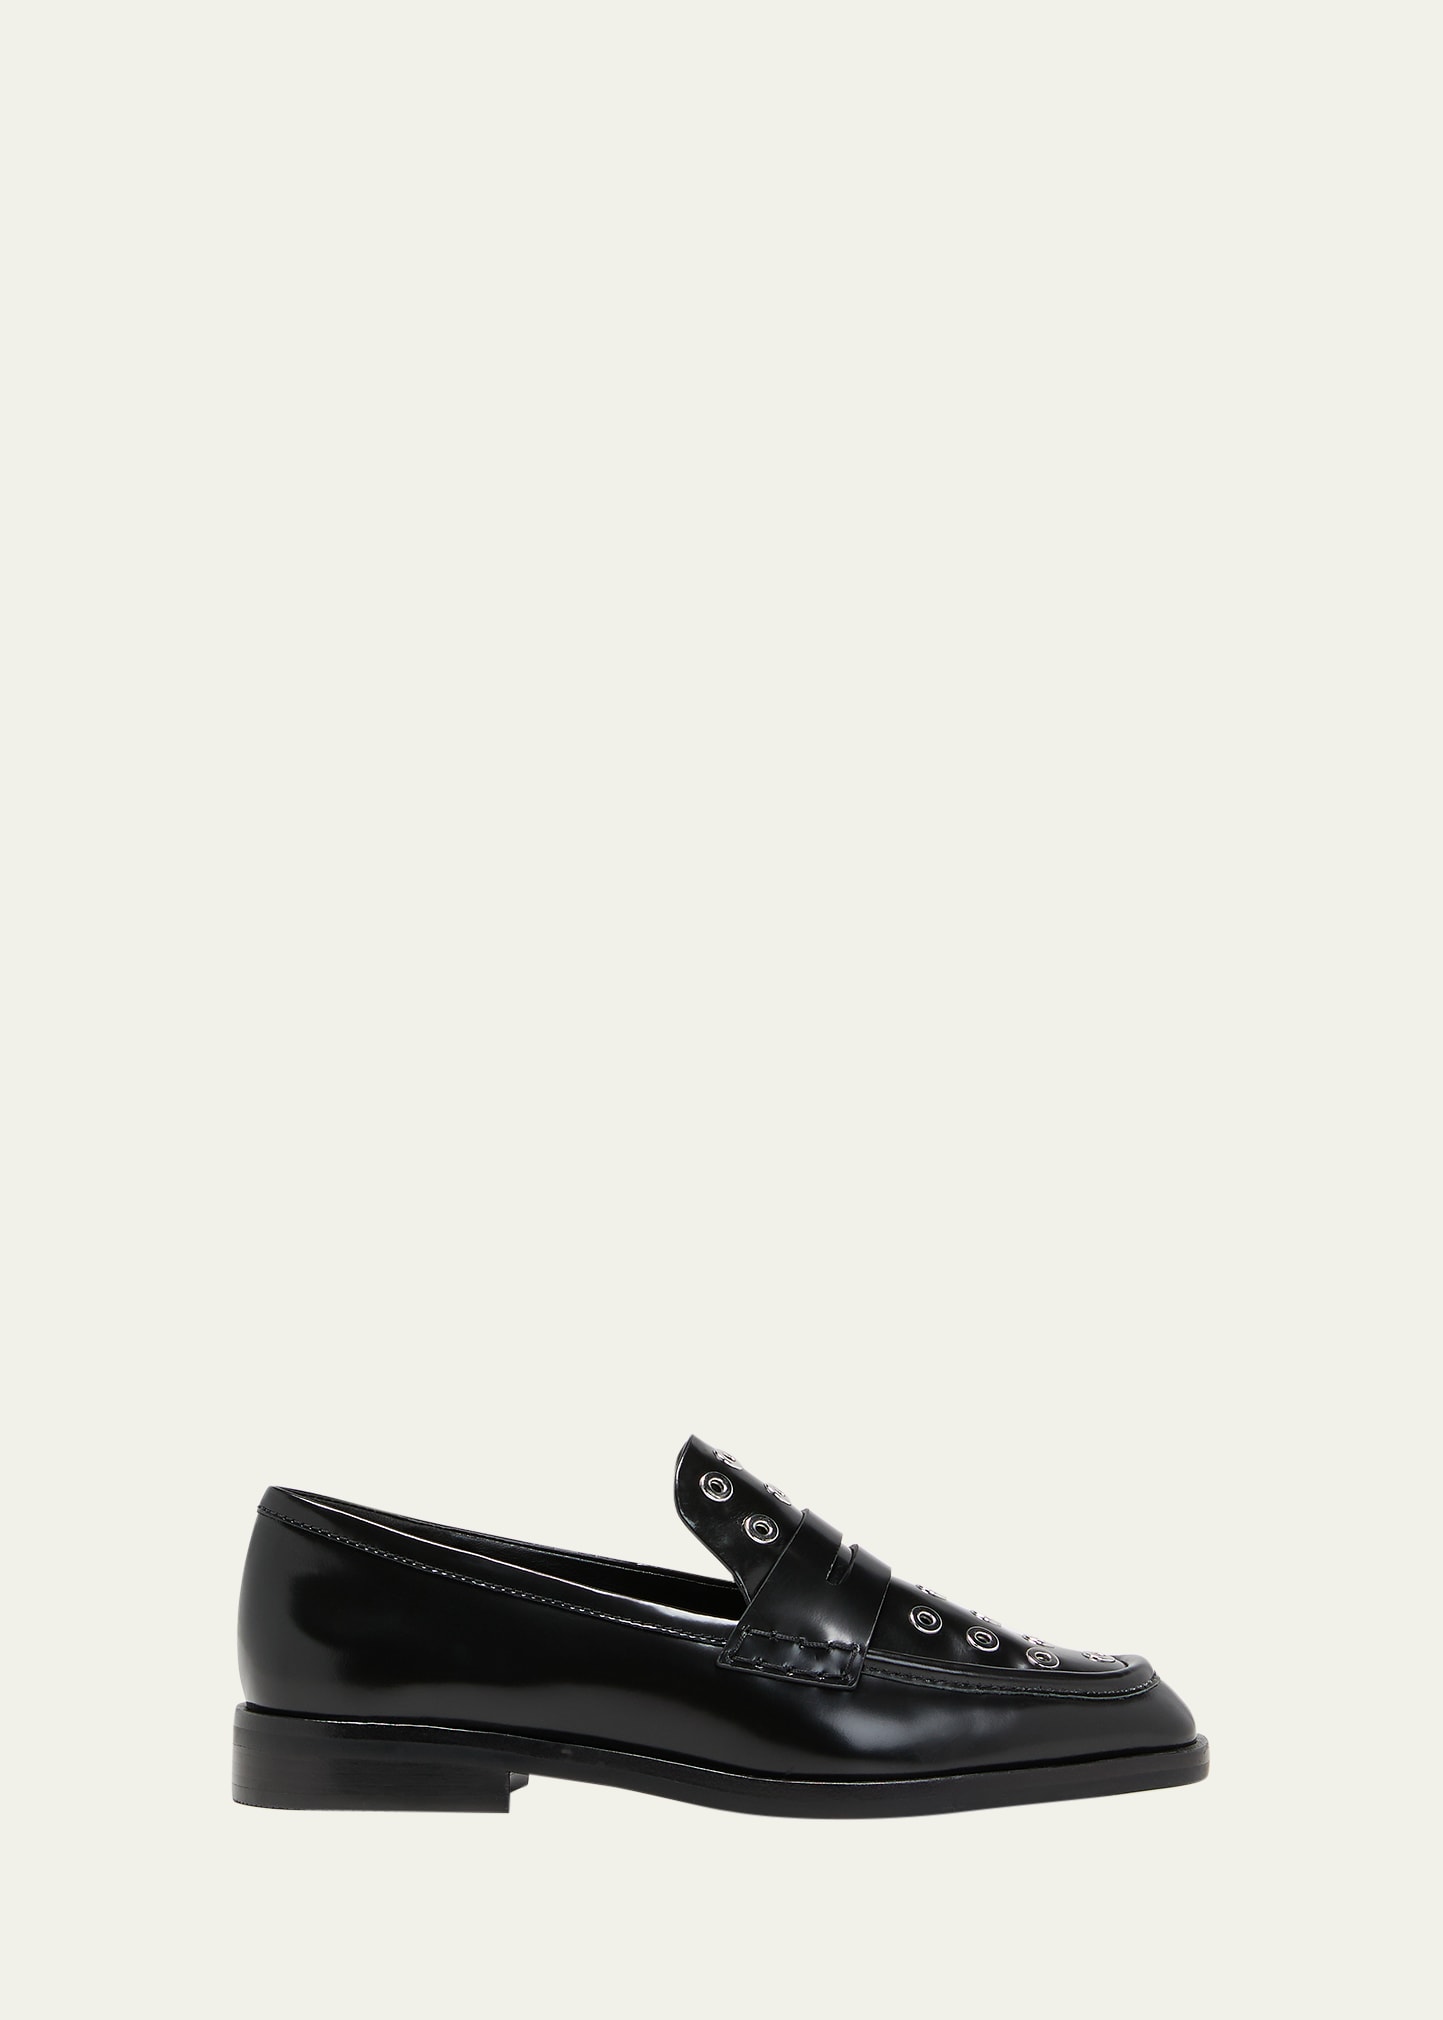 Alexa Leather Grommet Penny Loafers